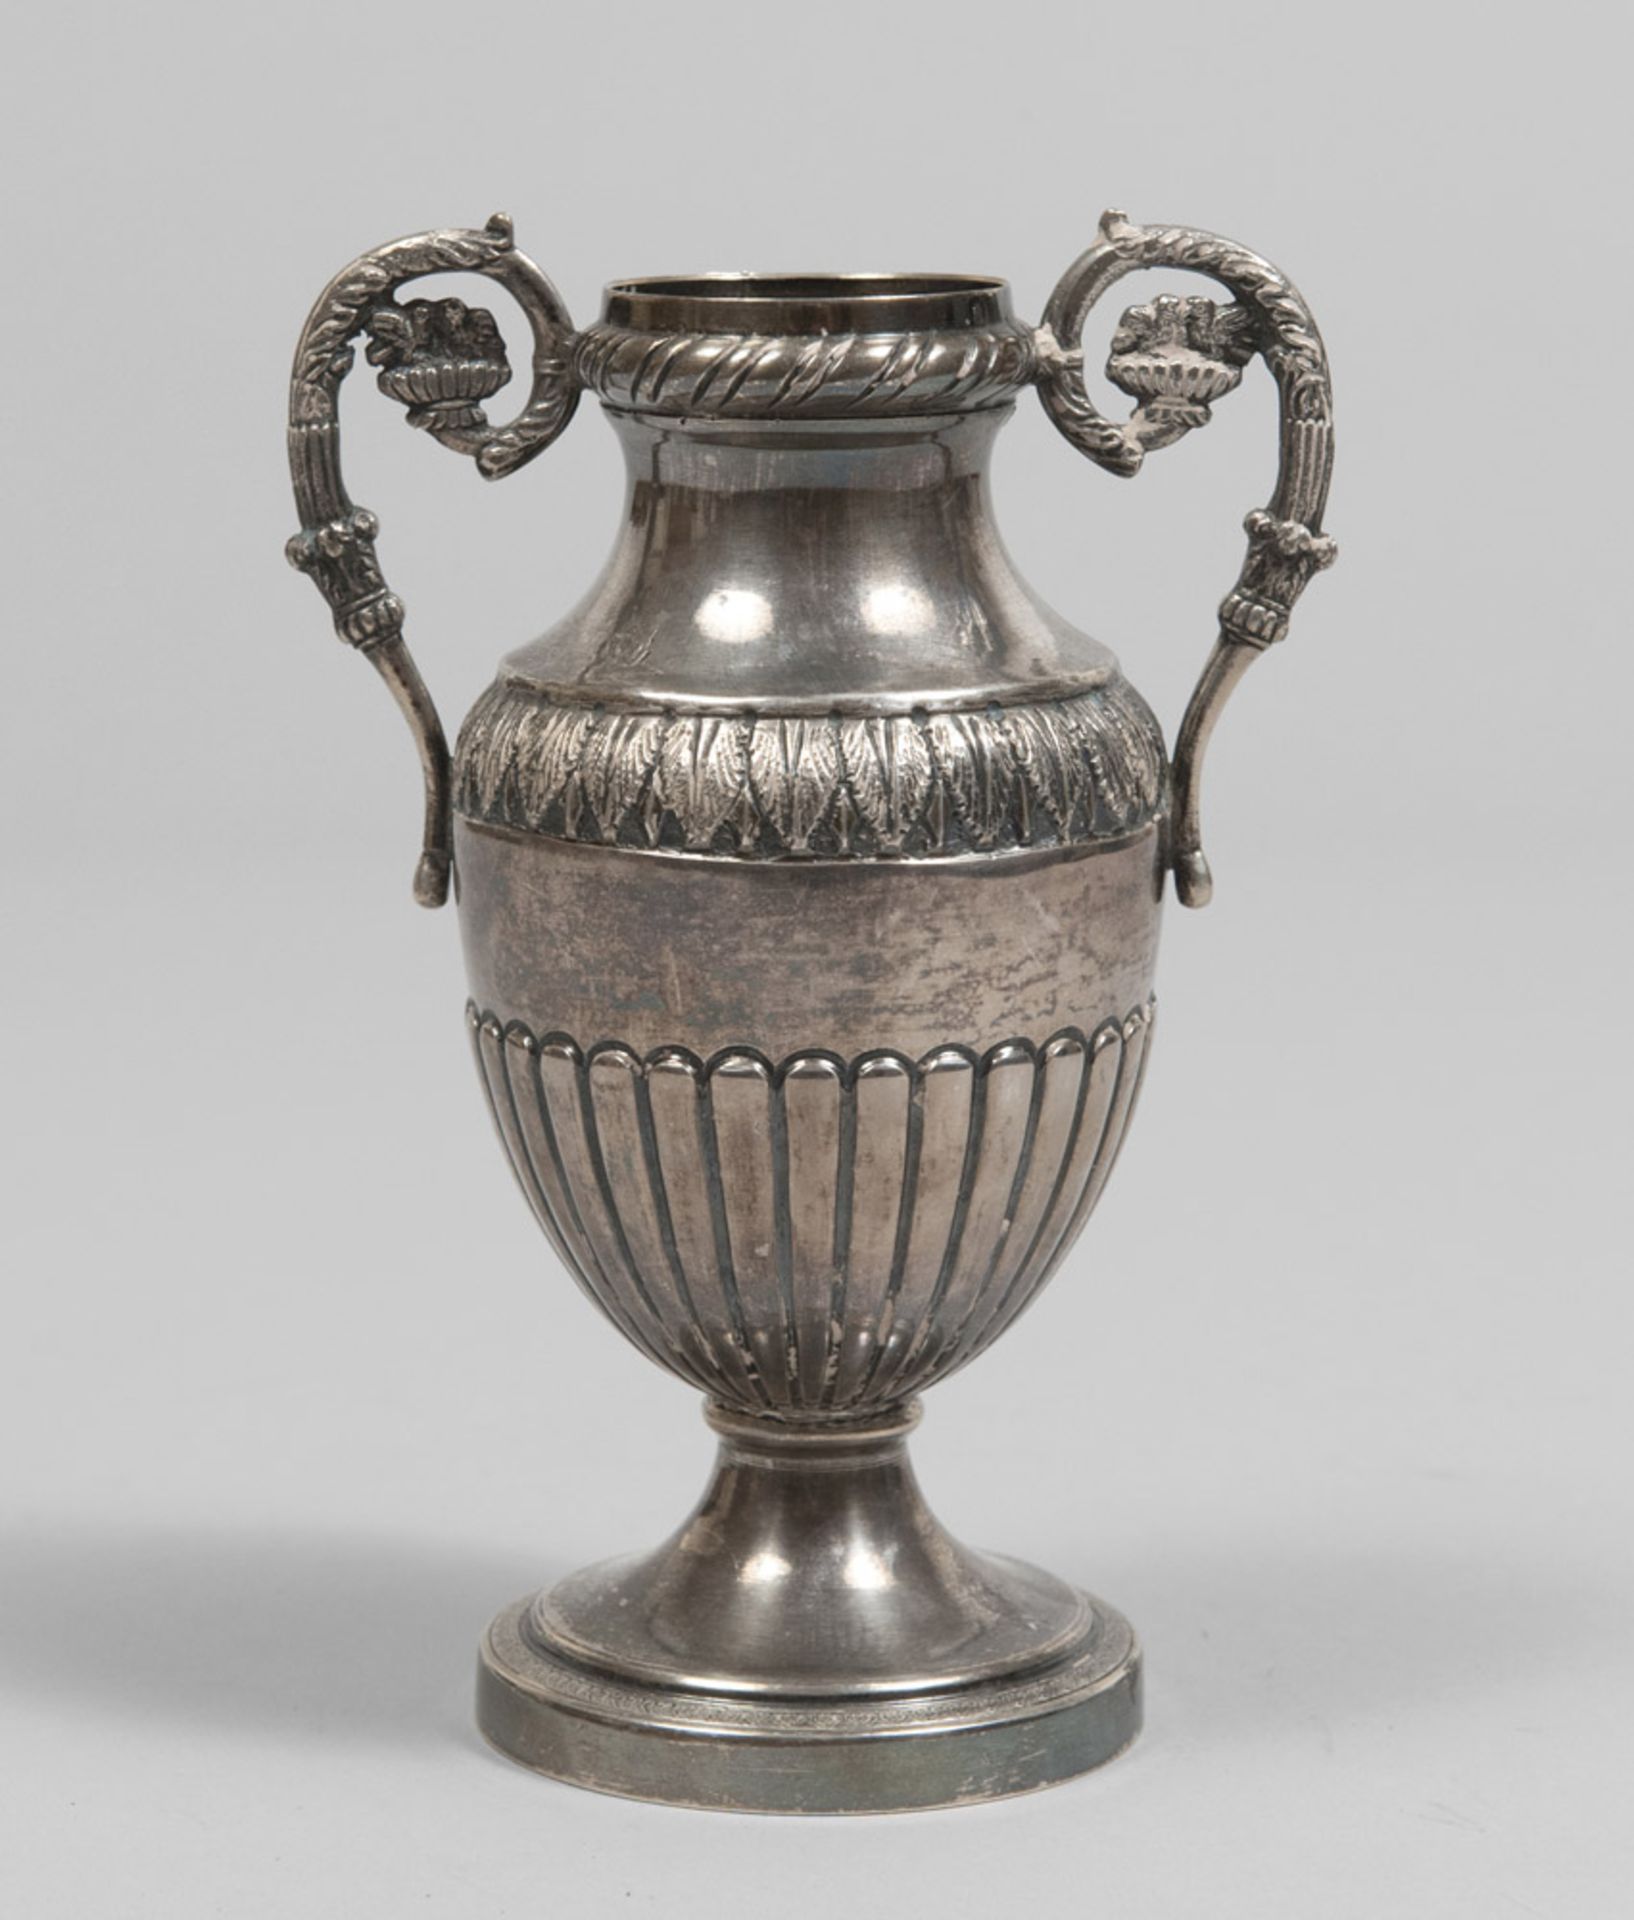 Pot in silver, probably Germany 19th century. Measures cm. 18 x 13 x 9, weight gr. 322.VASETTO IN